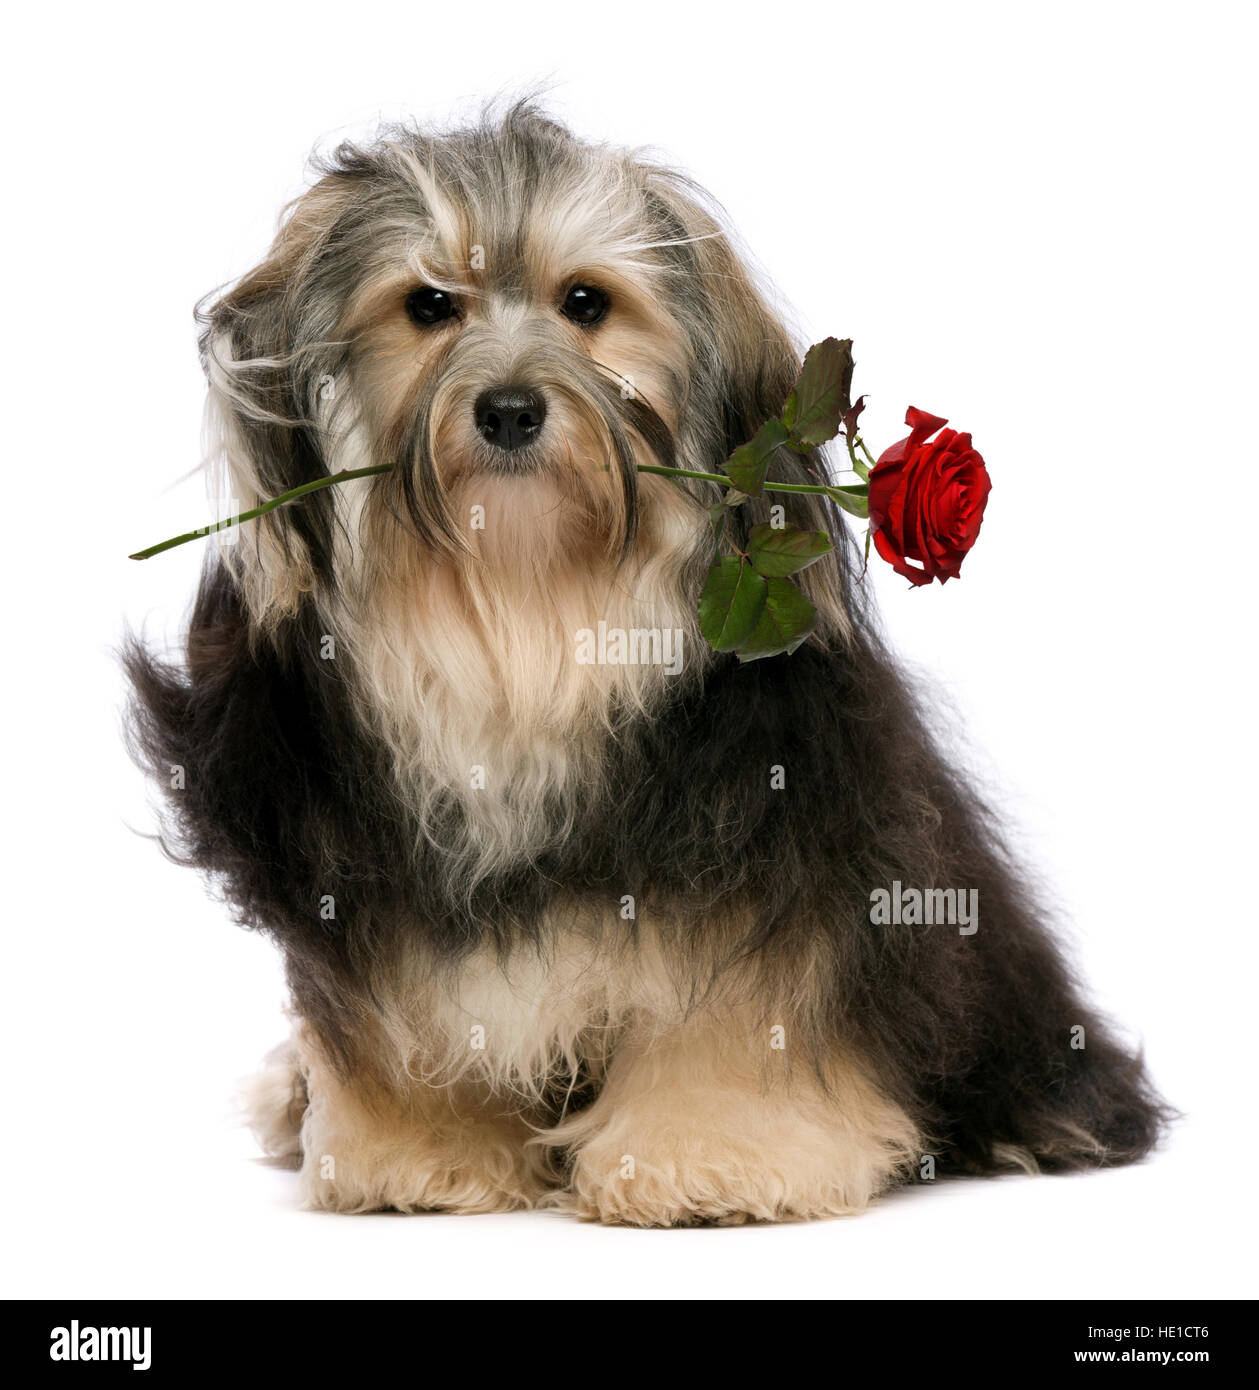 Lover tango havanese dog holding red rose in mouth Stock Photo